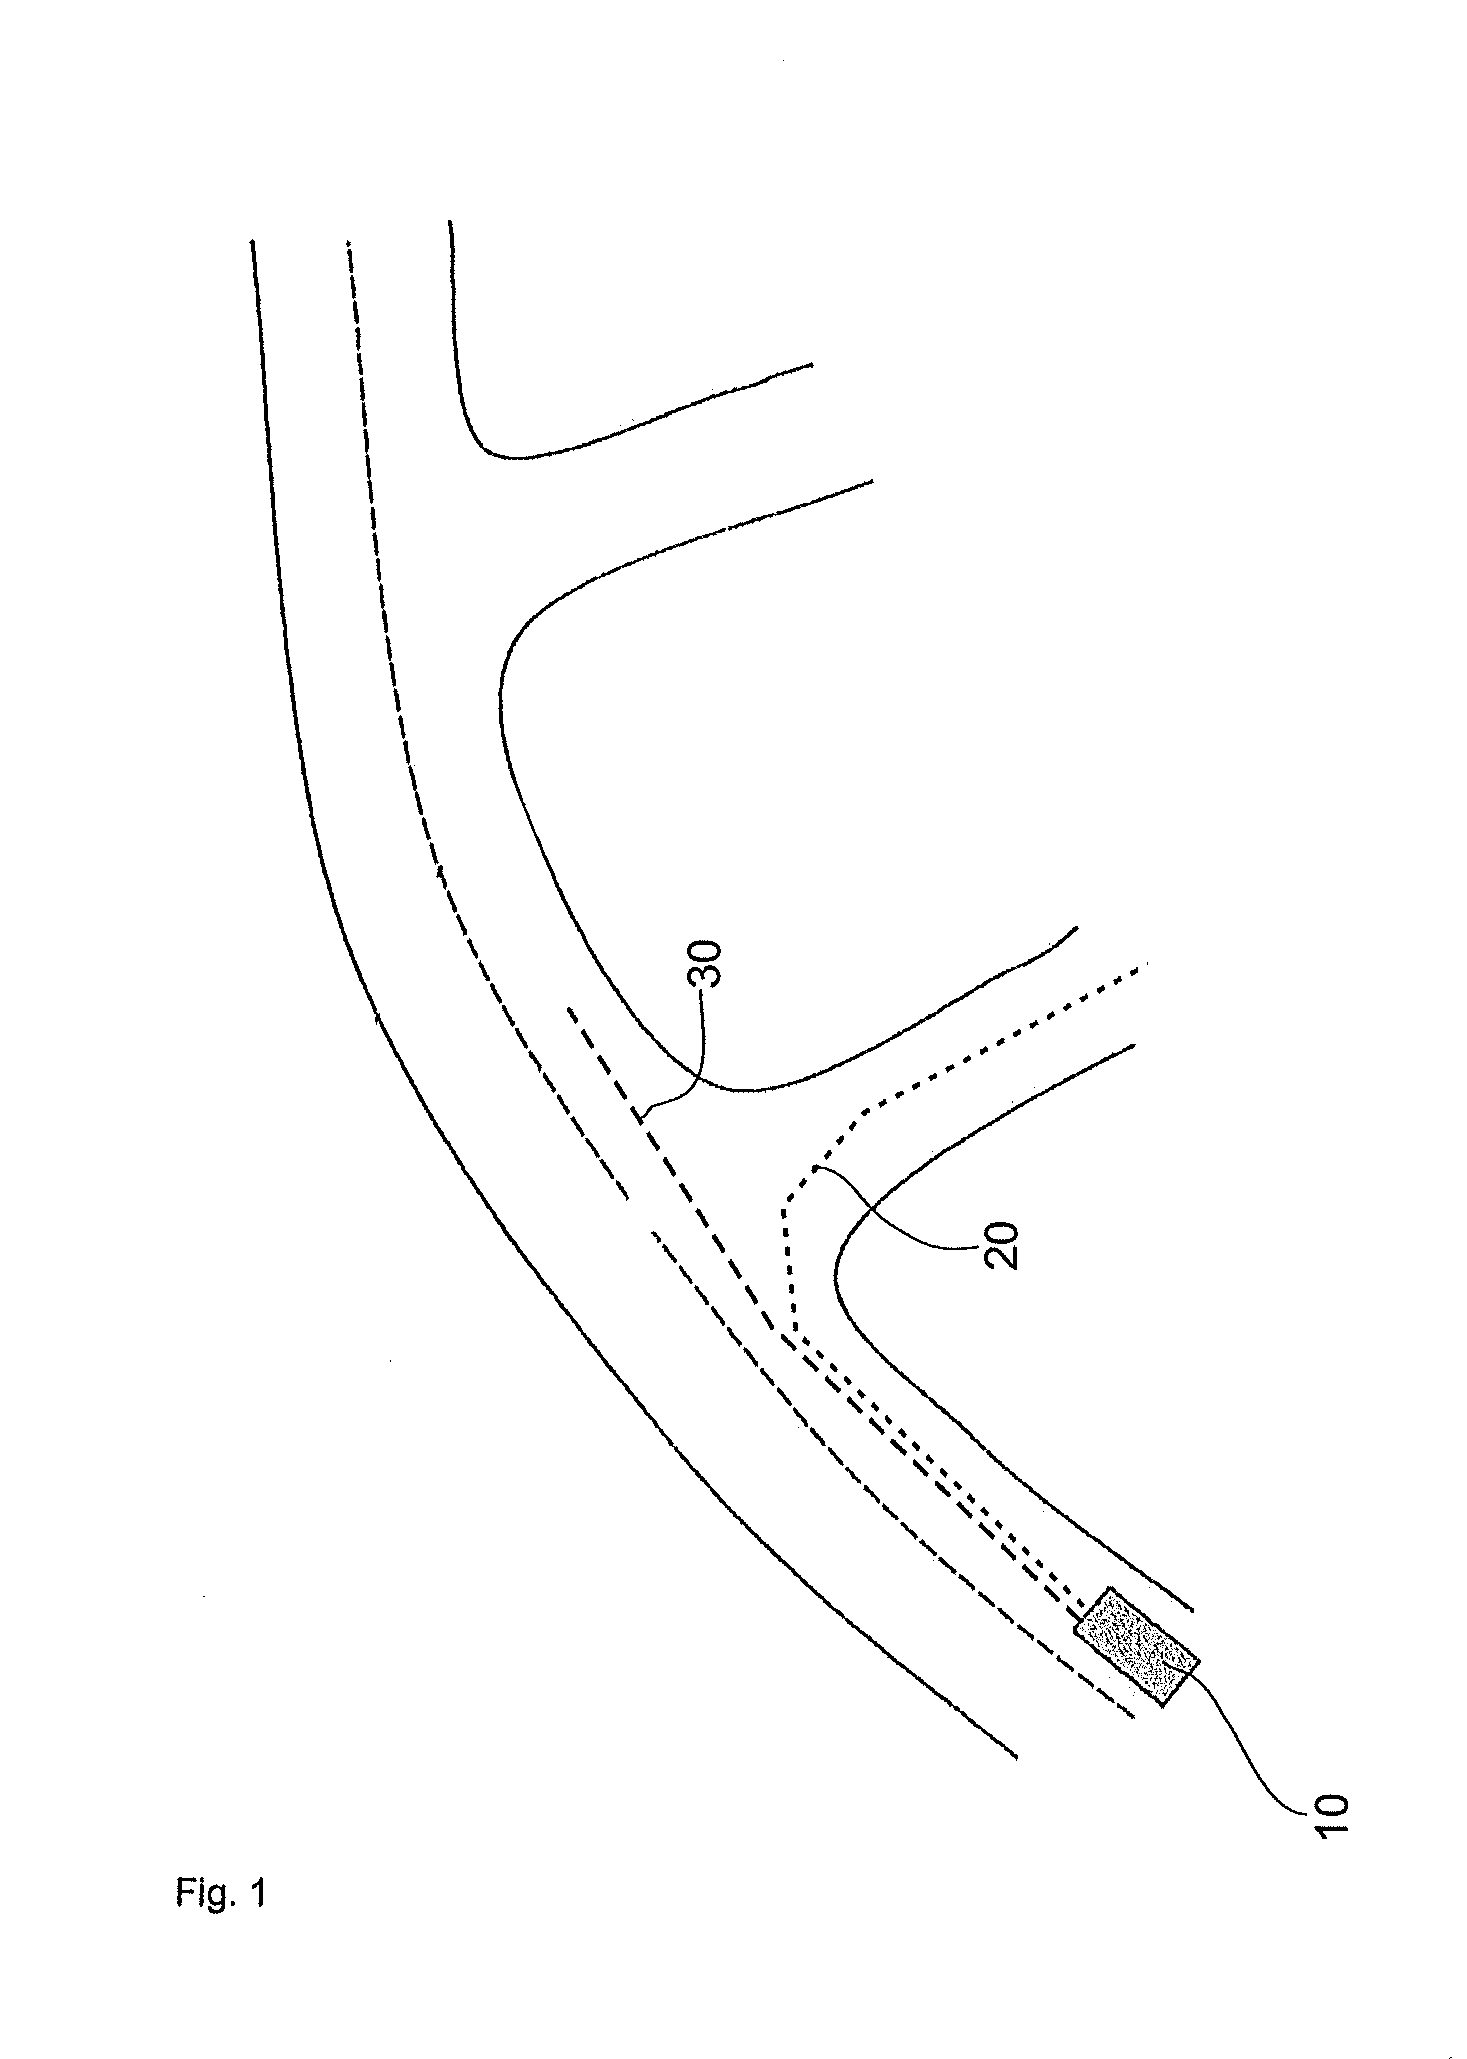 Process for setting the pivotal angle of the curve headlights of a vehicle